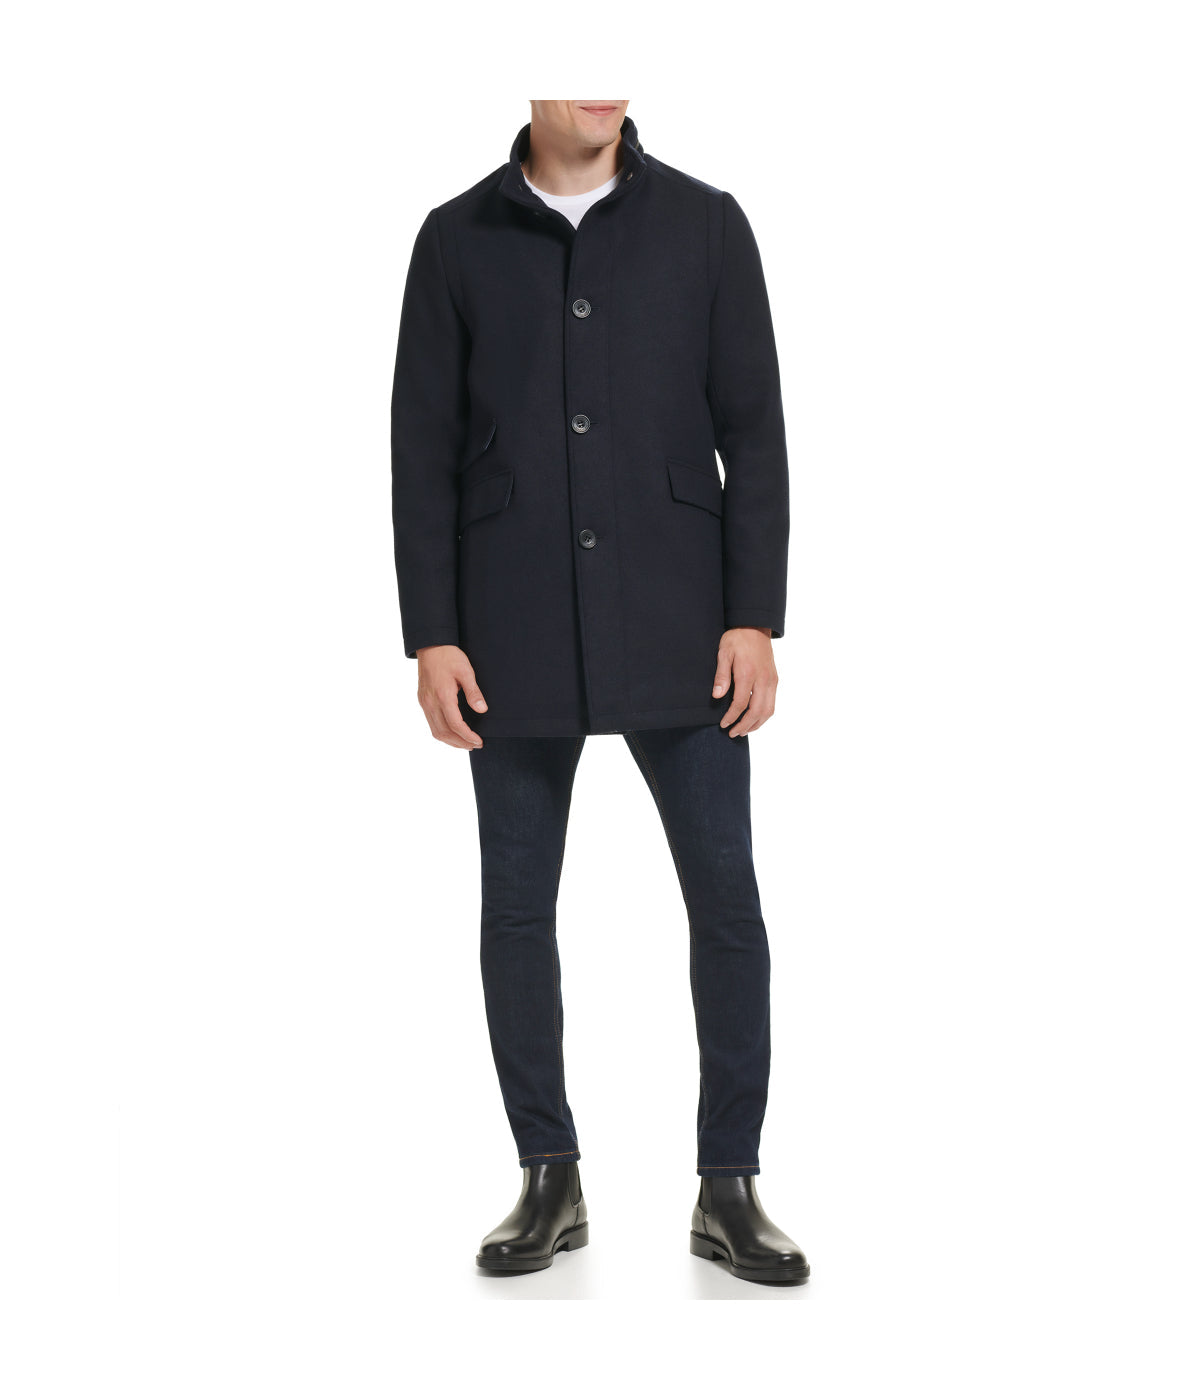 SB Stand Collar Melton Wool Coat With Double Pocket